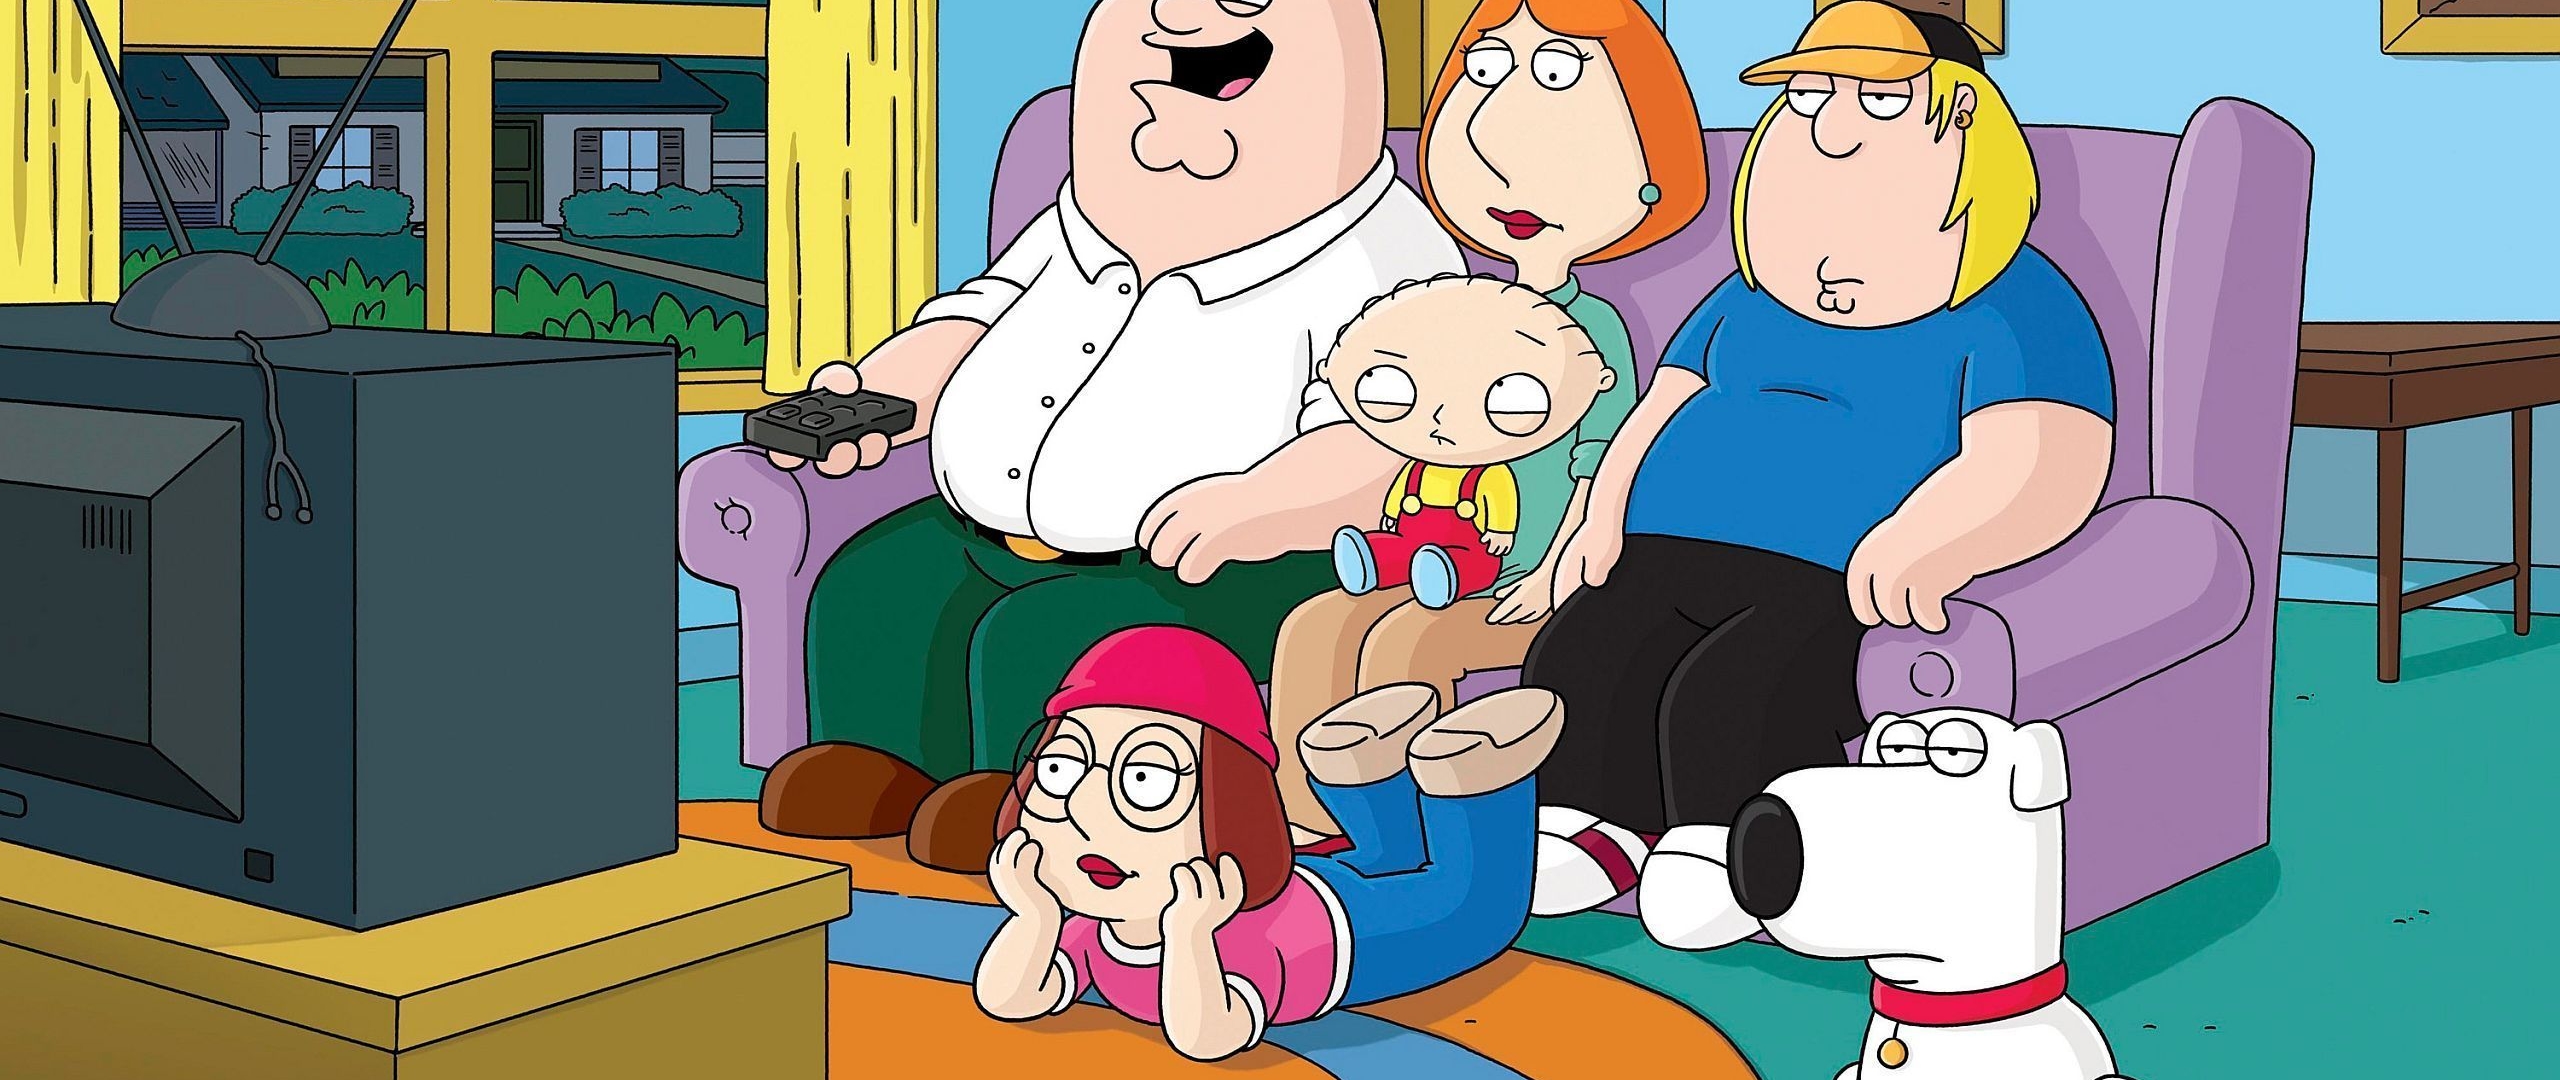 2560x1080 Family Guy Peter Griffin Lois Griffin 2560x1080 Resolution Wallpaper Hd Tv Series 4k Wallpapers Images Photos And Background